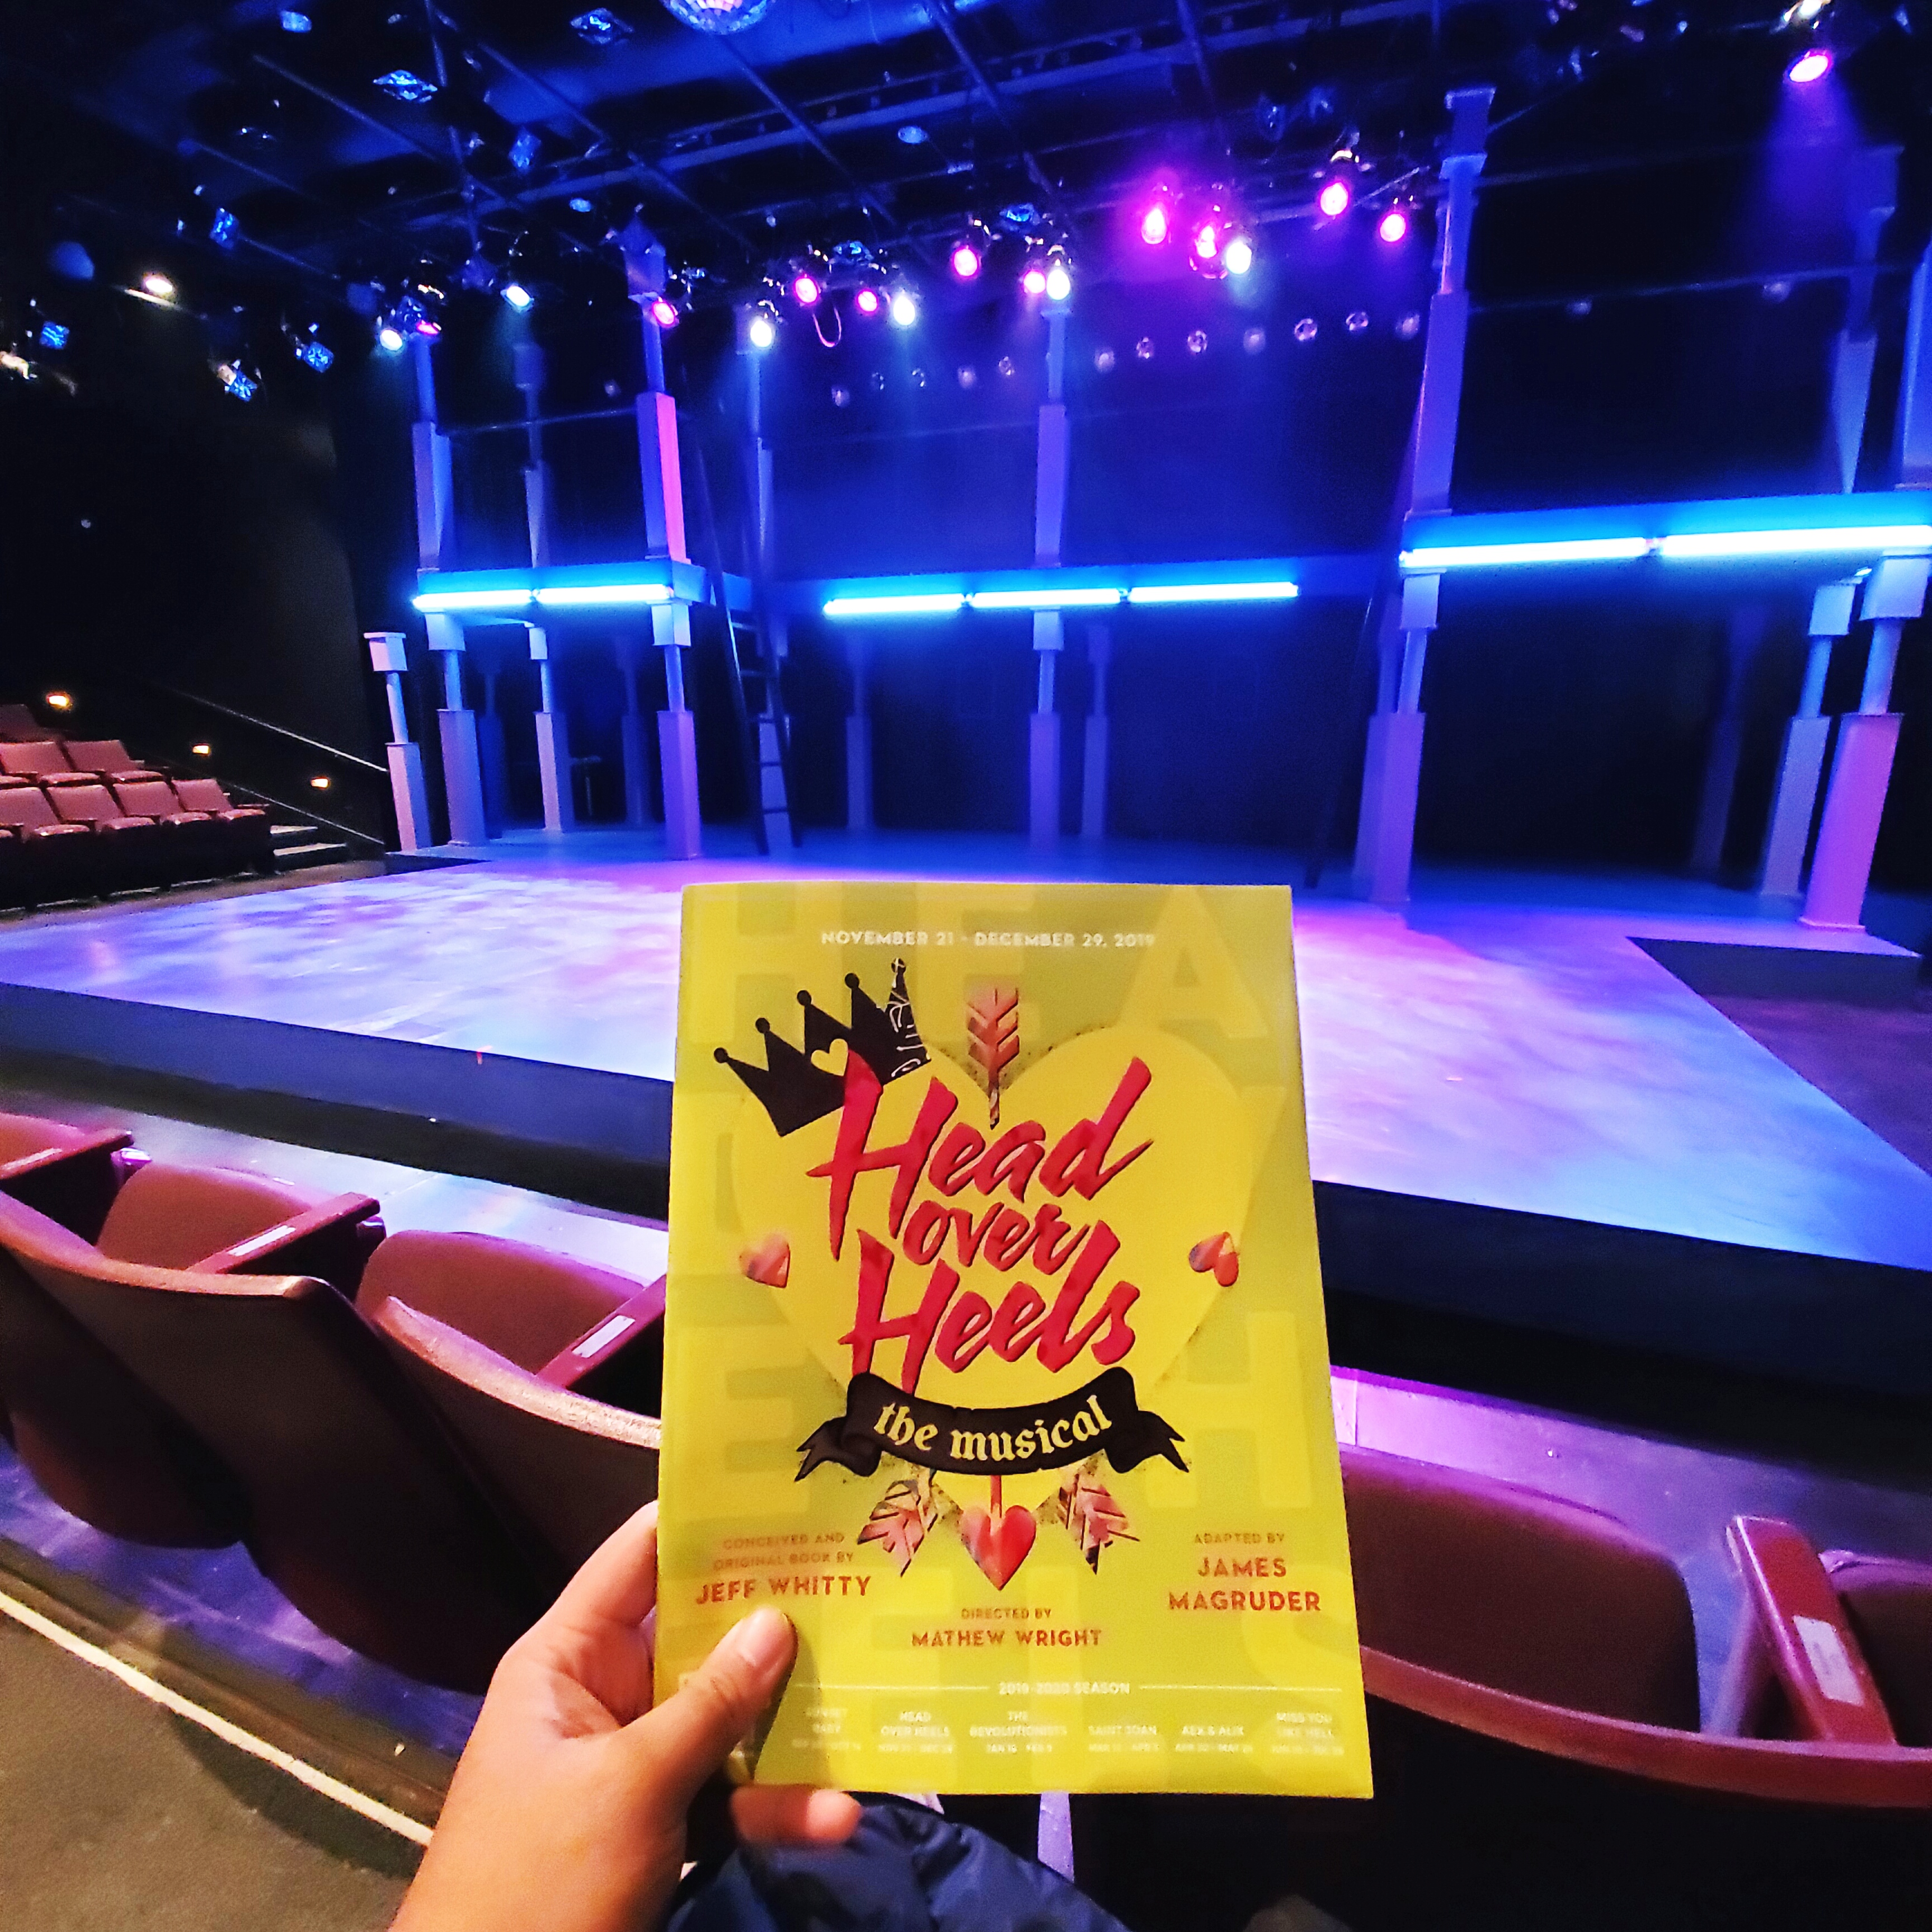 Head Over Heels - The New Musical w/ ArtsWest Playhouse and Gallery. #Fun #musical redefining gender norms. #Energetic cast & impressive #trans actress. Wish the dialog wasn't old English but it was a novel mash up w/ #80s #newWave #rock Go Go's hits. #Amazon #Arcadia